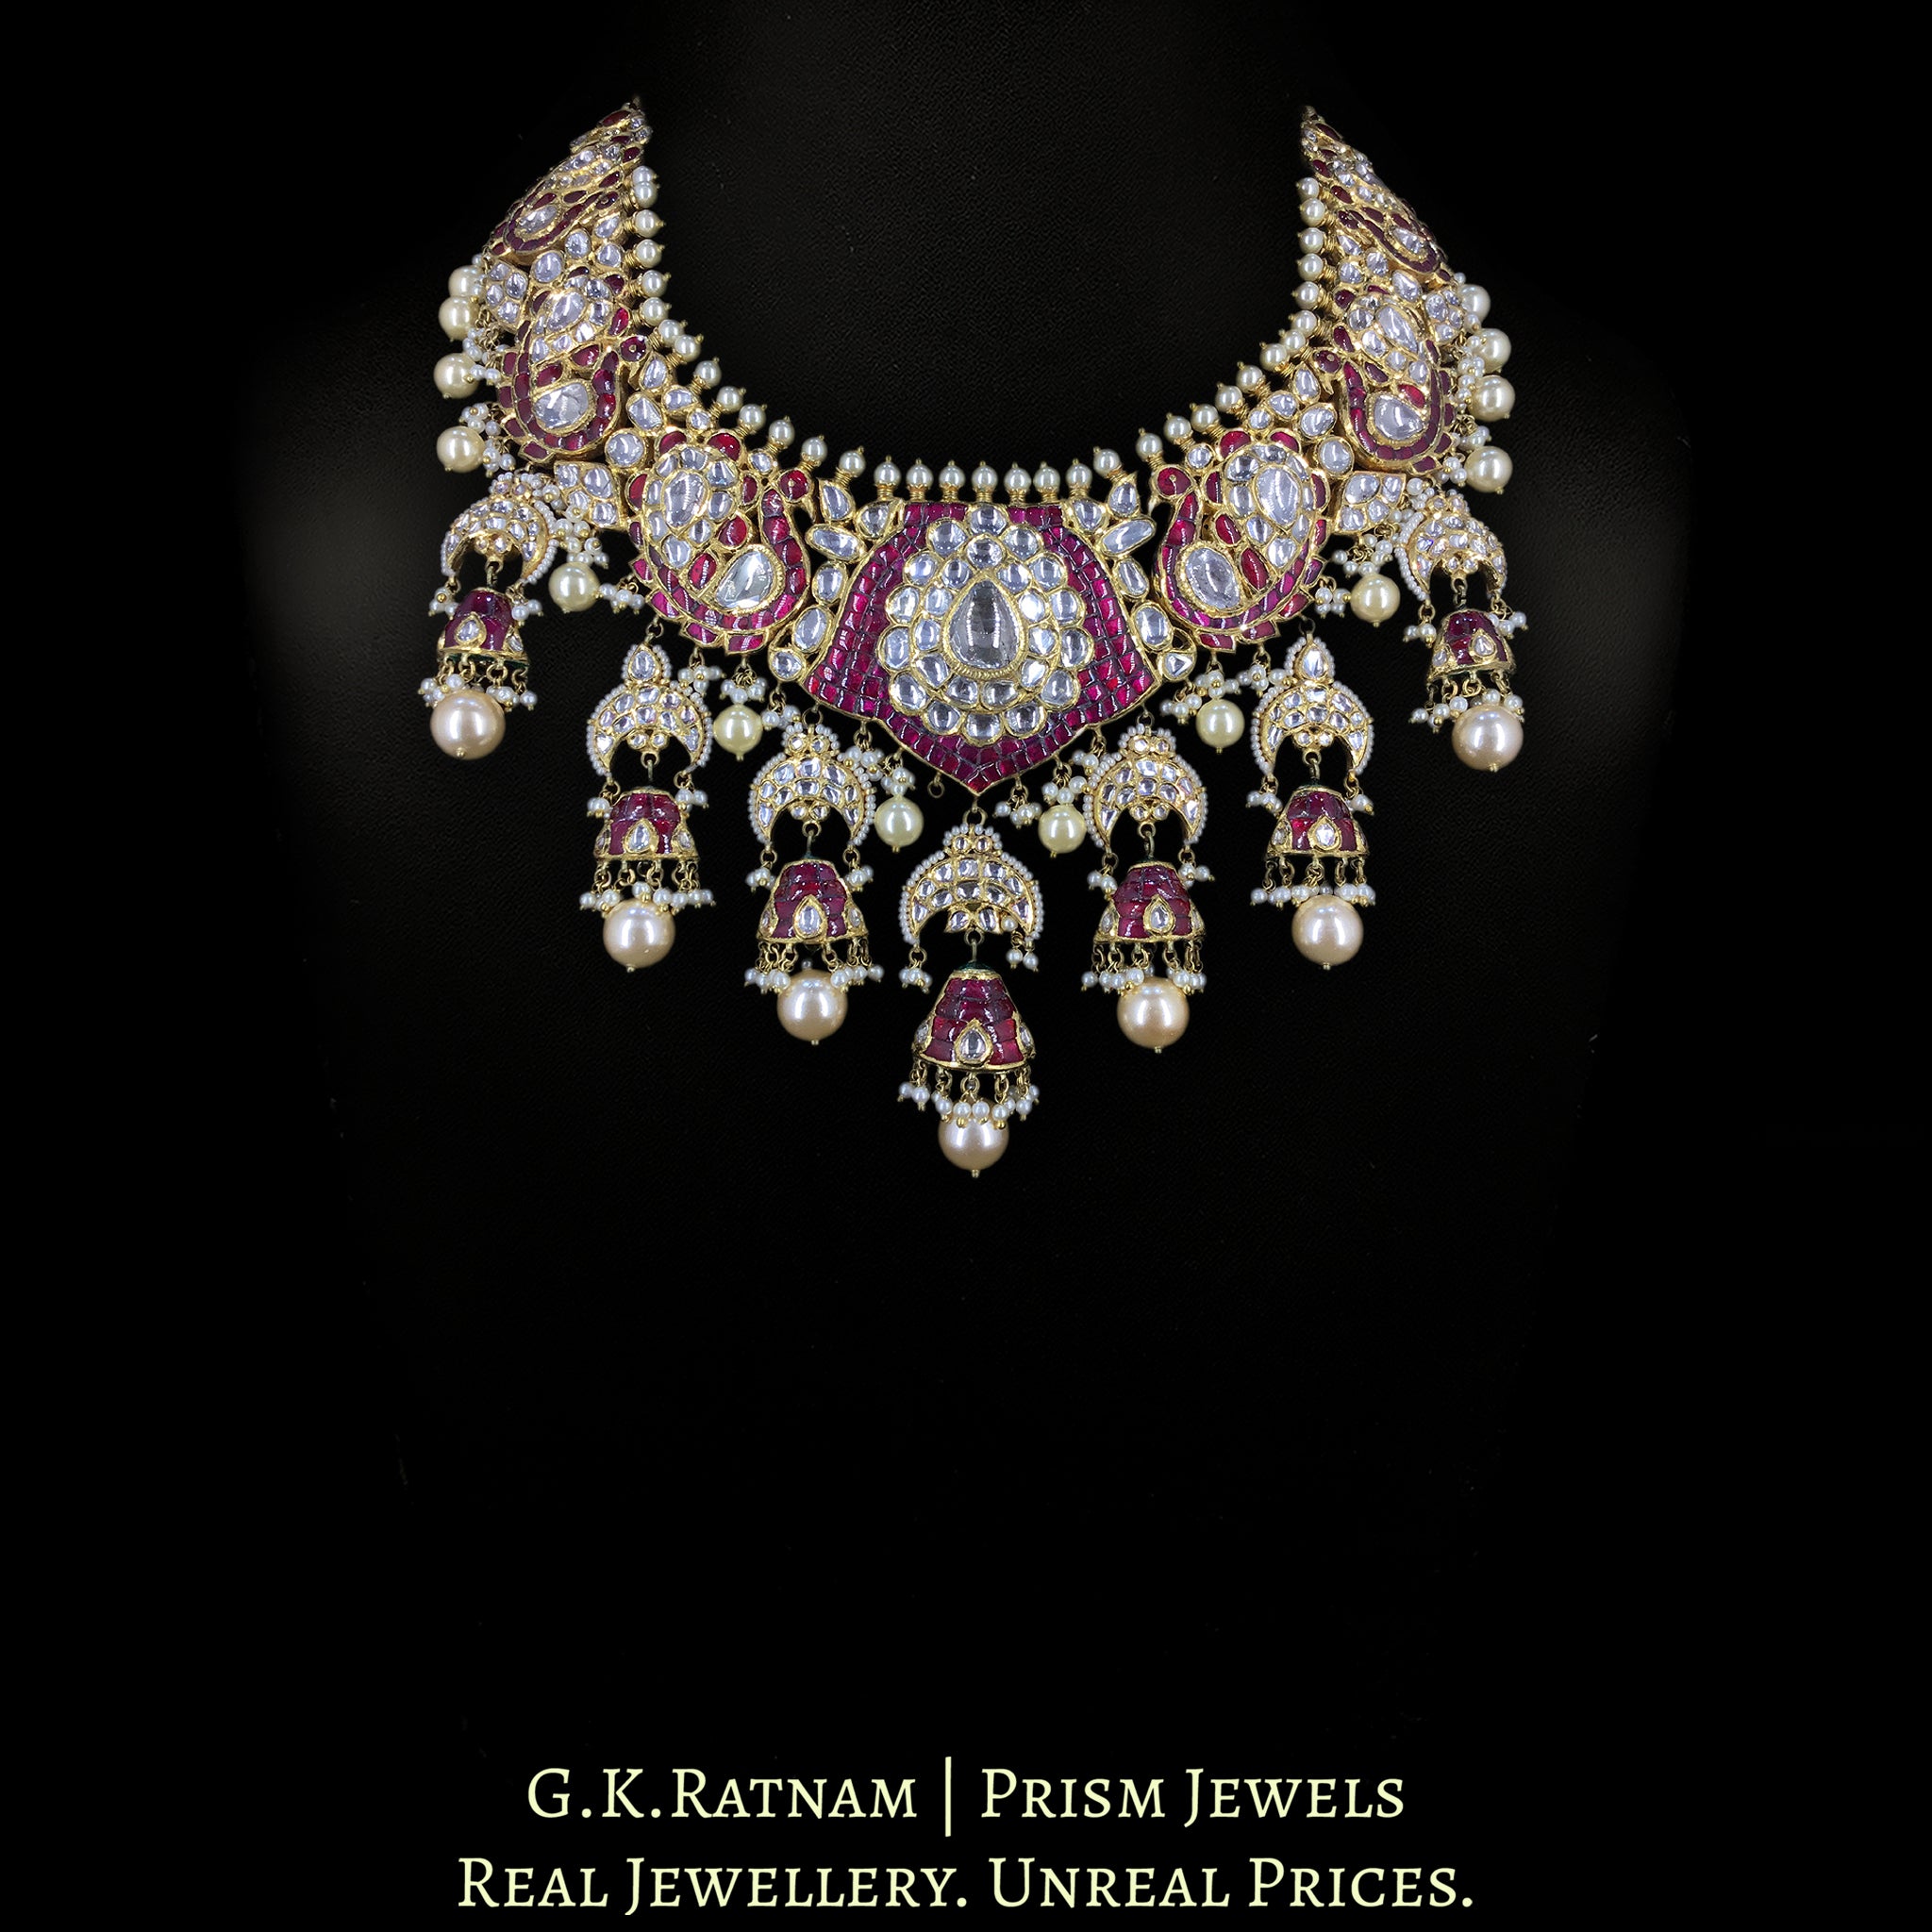 18k Gold and Diamond Polki Necklace Set with inverted chand motifs and half-jhumkis